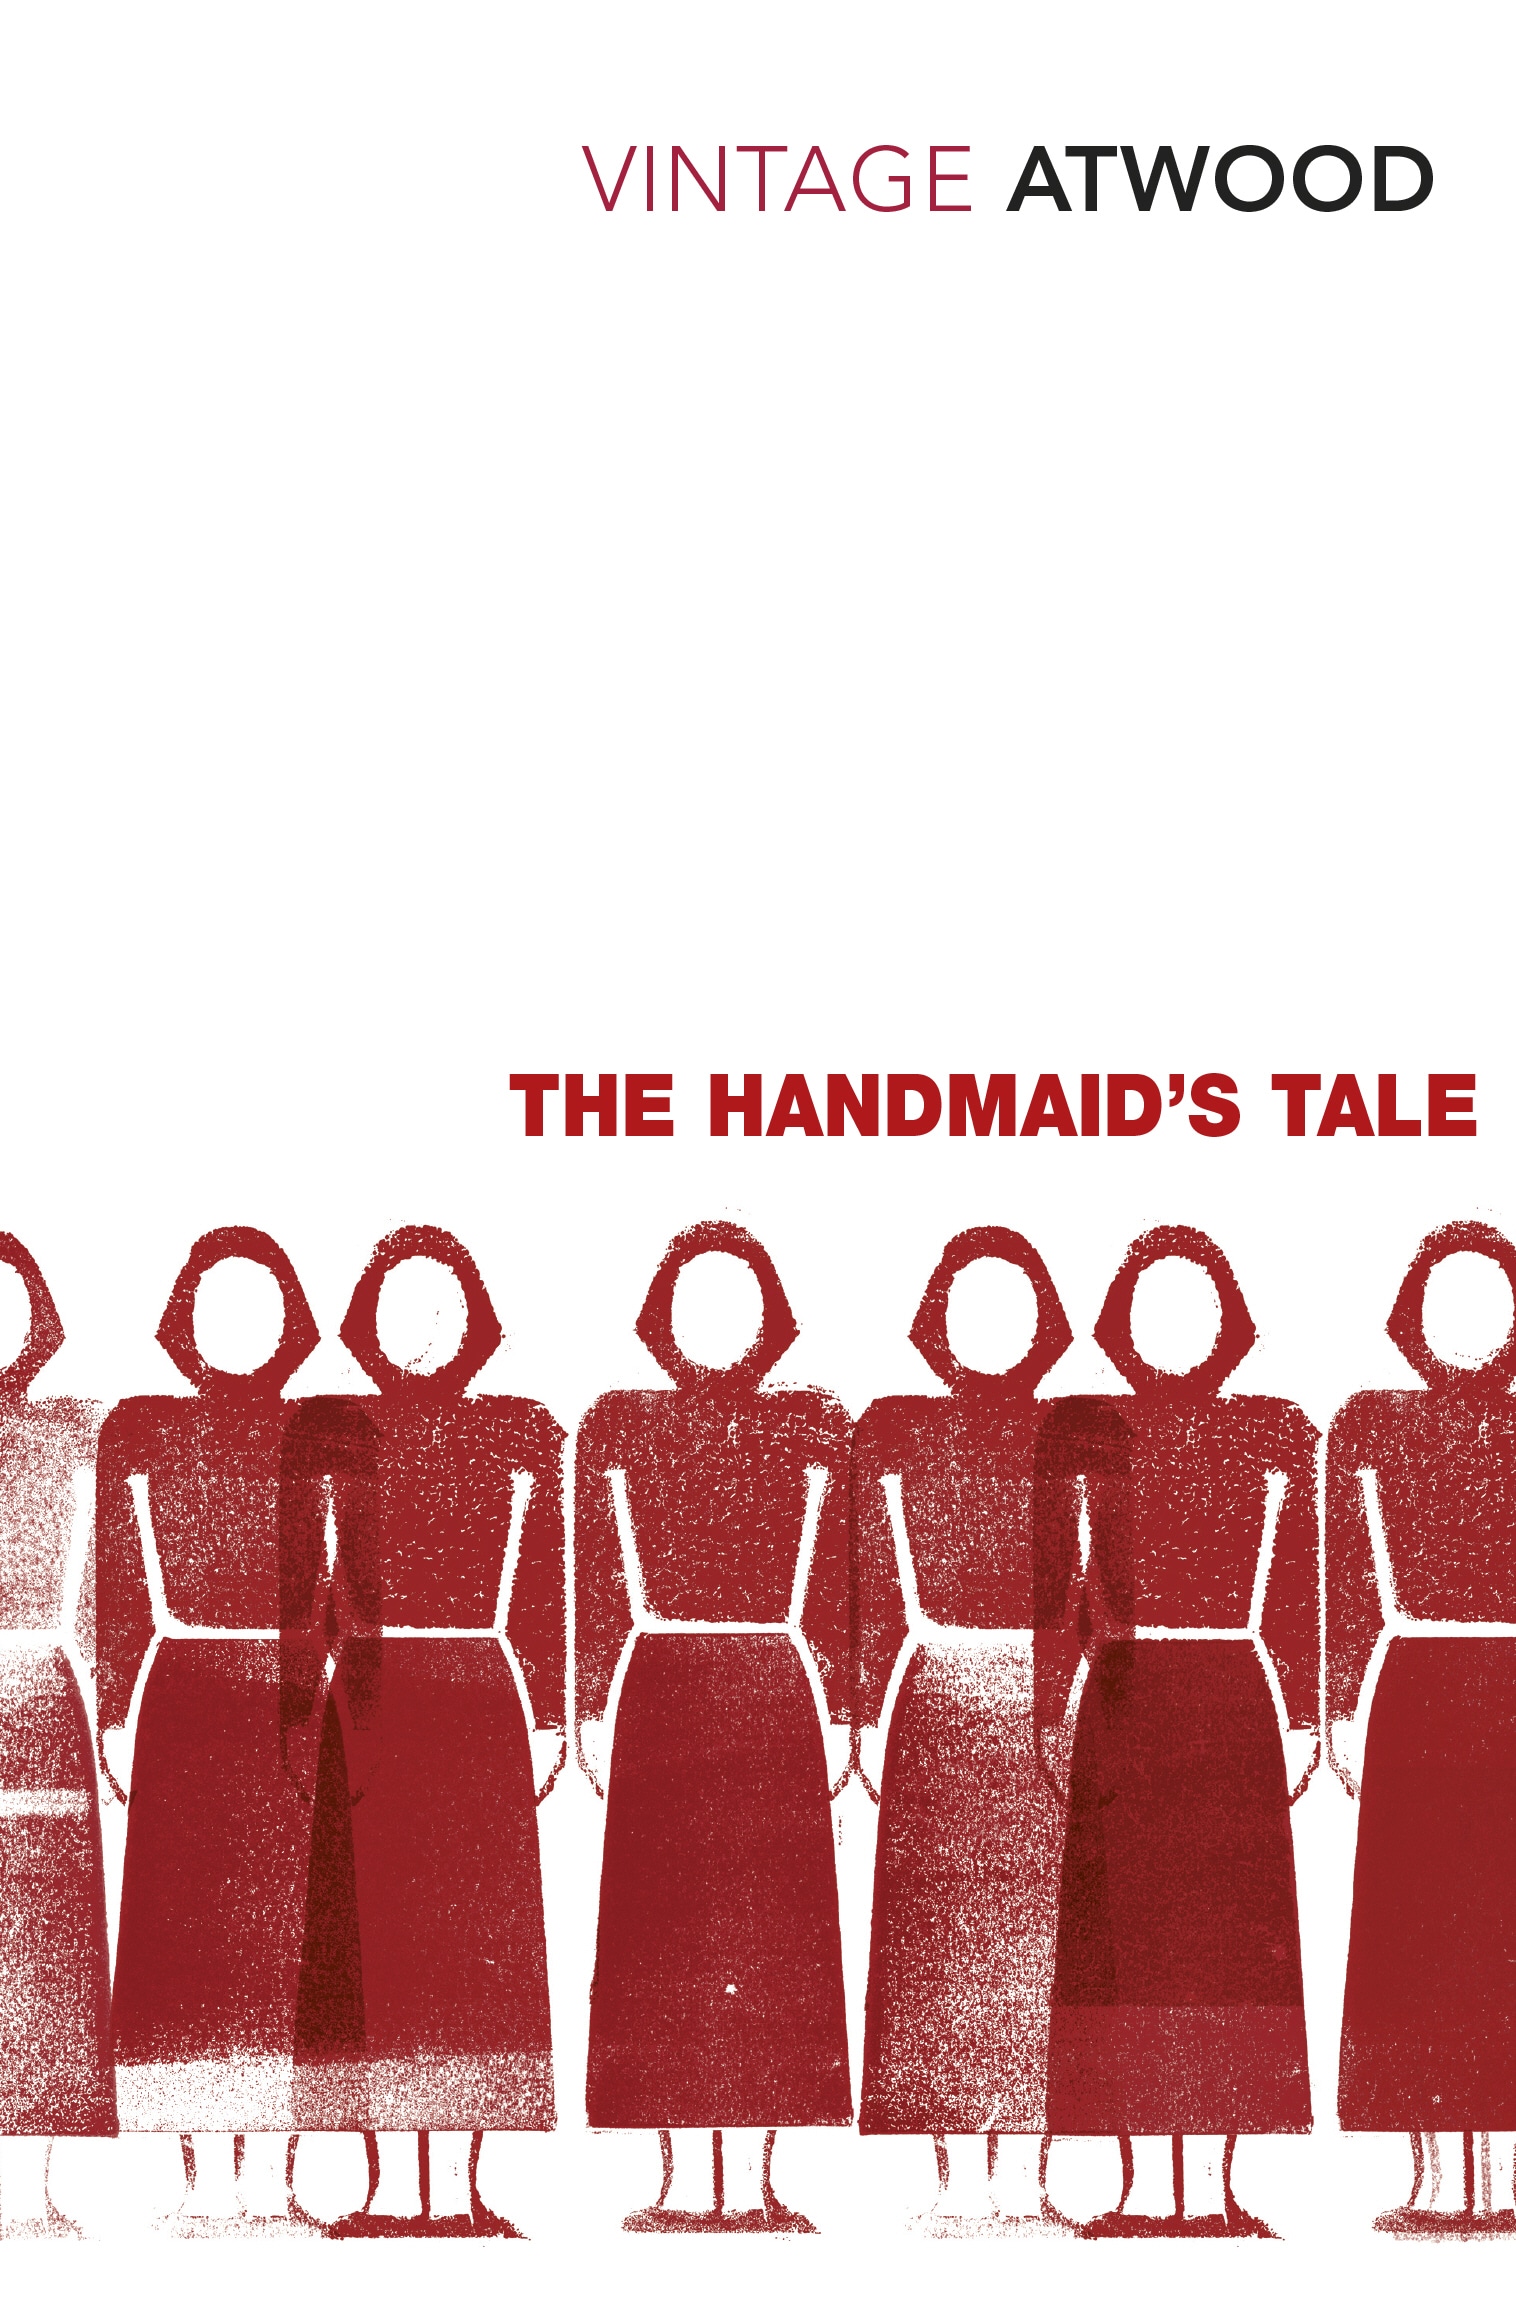 Book “The Handmaid's Tale” by Margaret Atwood — October 7, 2010